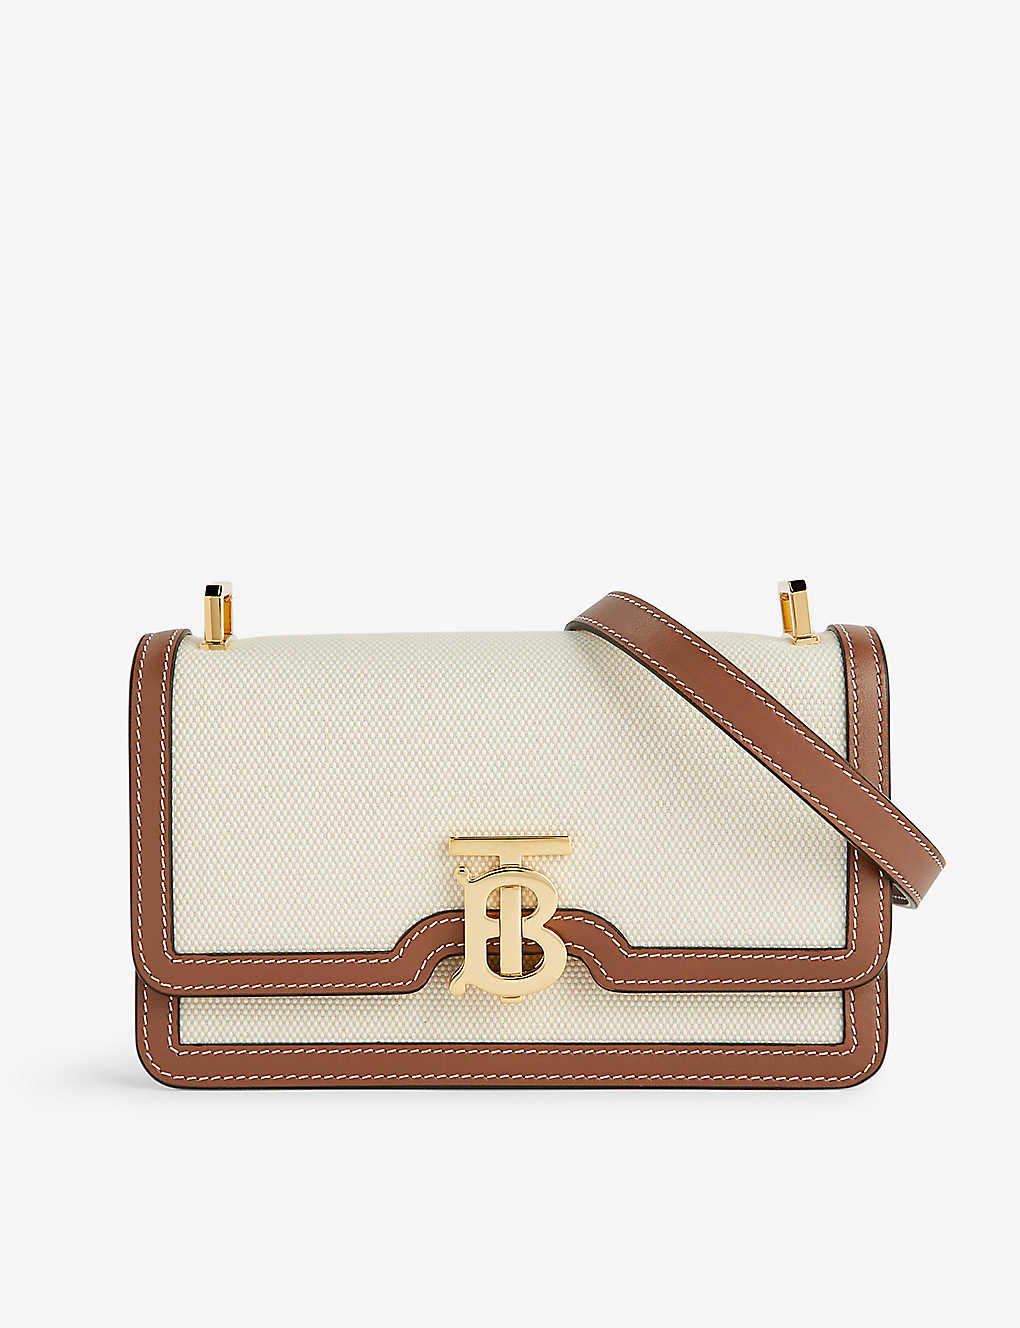 Burberry Elizabeth Small Cotton And Leather Cross-body Bag In Vntg Chk/briar Brown